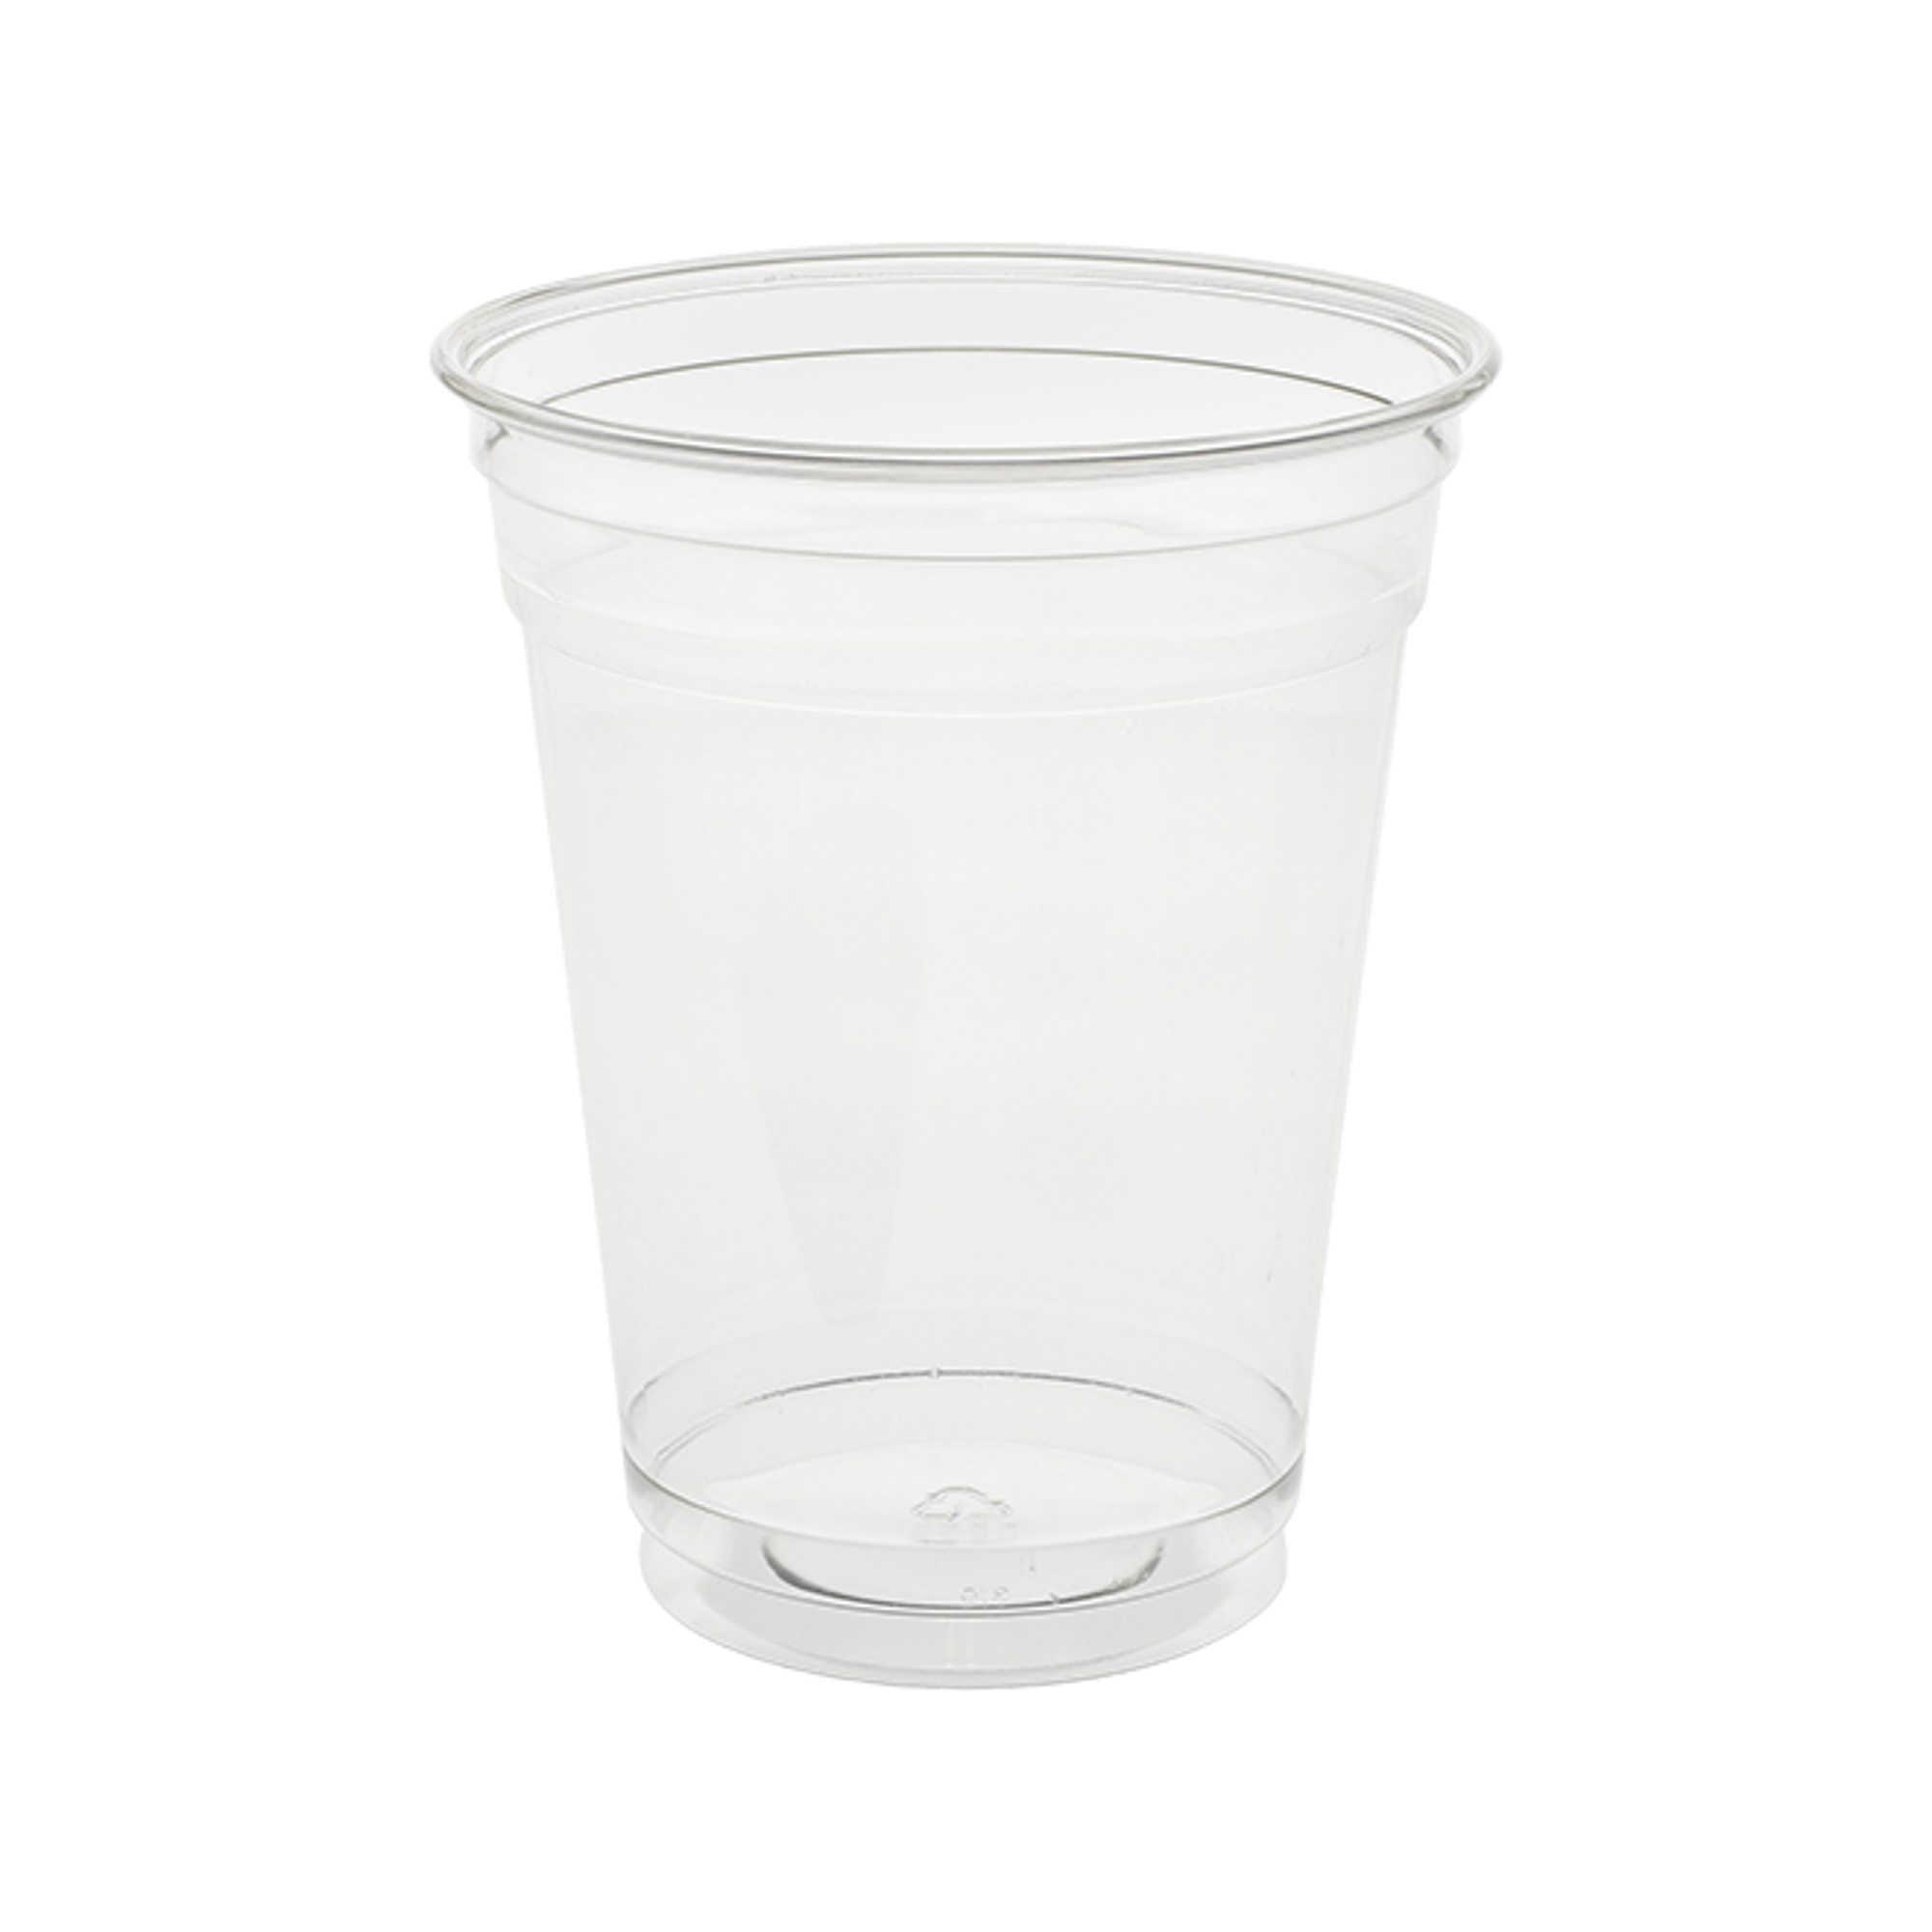 rPET Smoothie Cups & Lids  Made with a minimum 30% recycled content